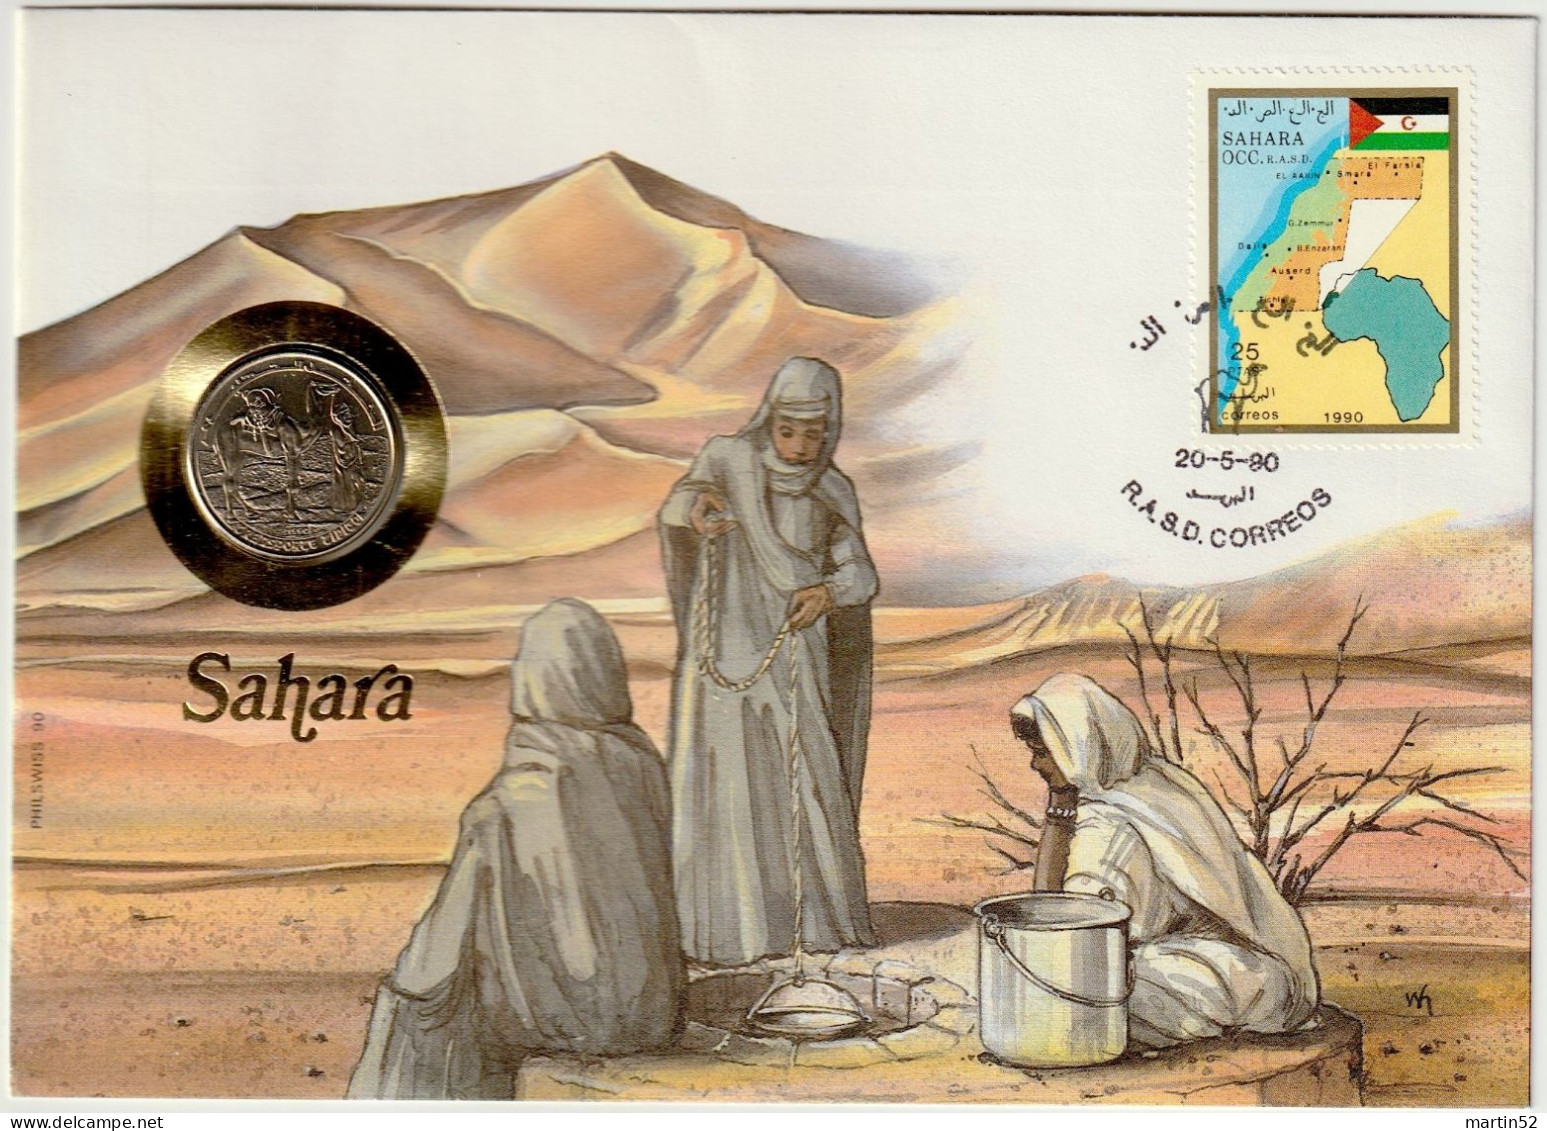 SAHARA OCC.1990: Numis-letter With "coin" And Semi-official Stamp With Postmark R.A.S.D CORREOS 20-5-90 - Spanish Sahara